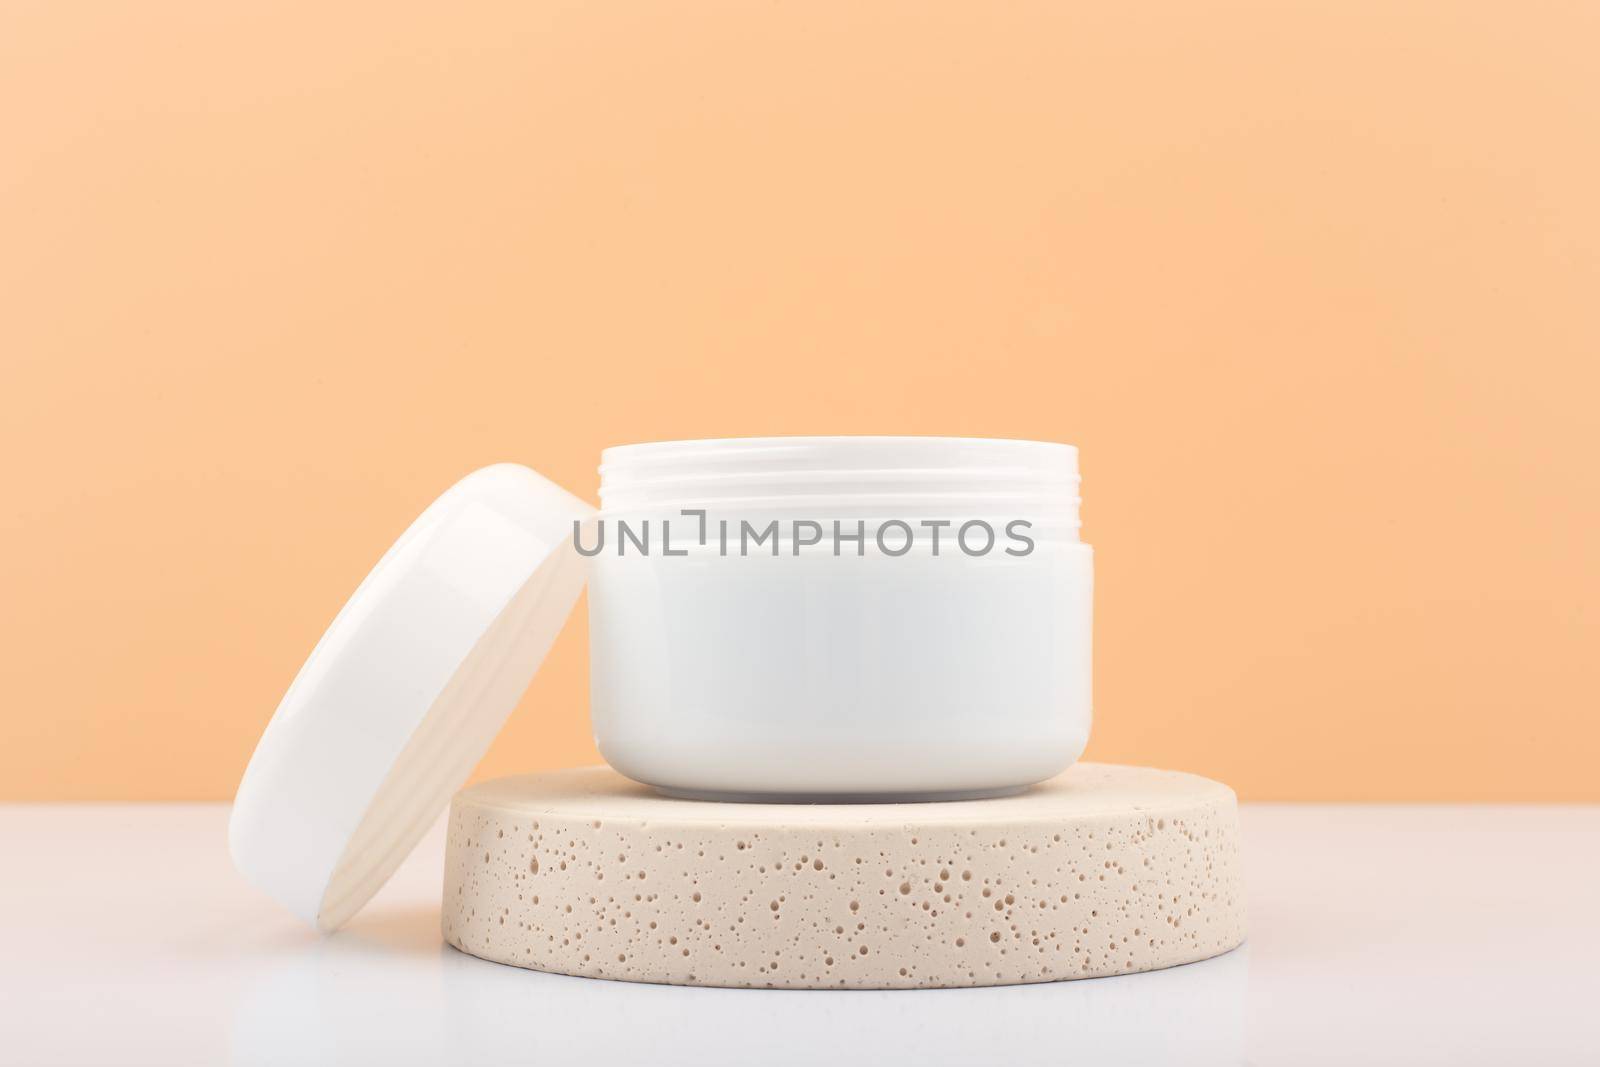 White opened cosmetic jar on beige podium against beige background with palm leaf. Concept of cosmetic products for daily skin or hair care. Jar with scrub, mask or balm.